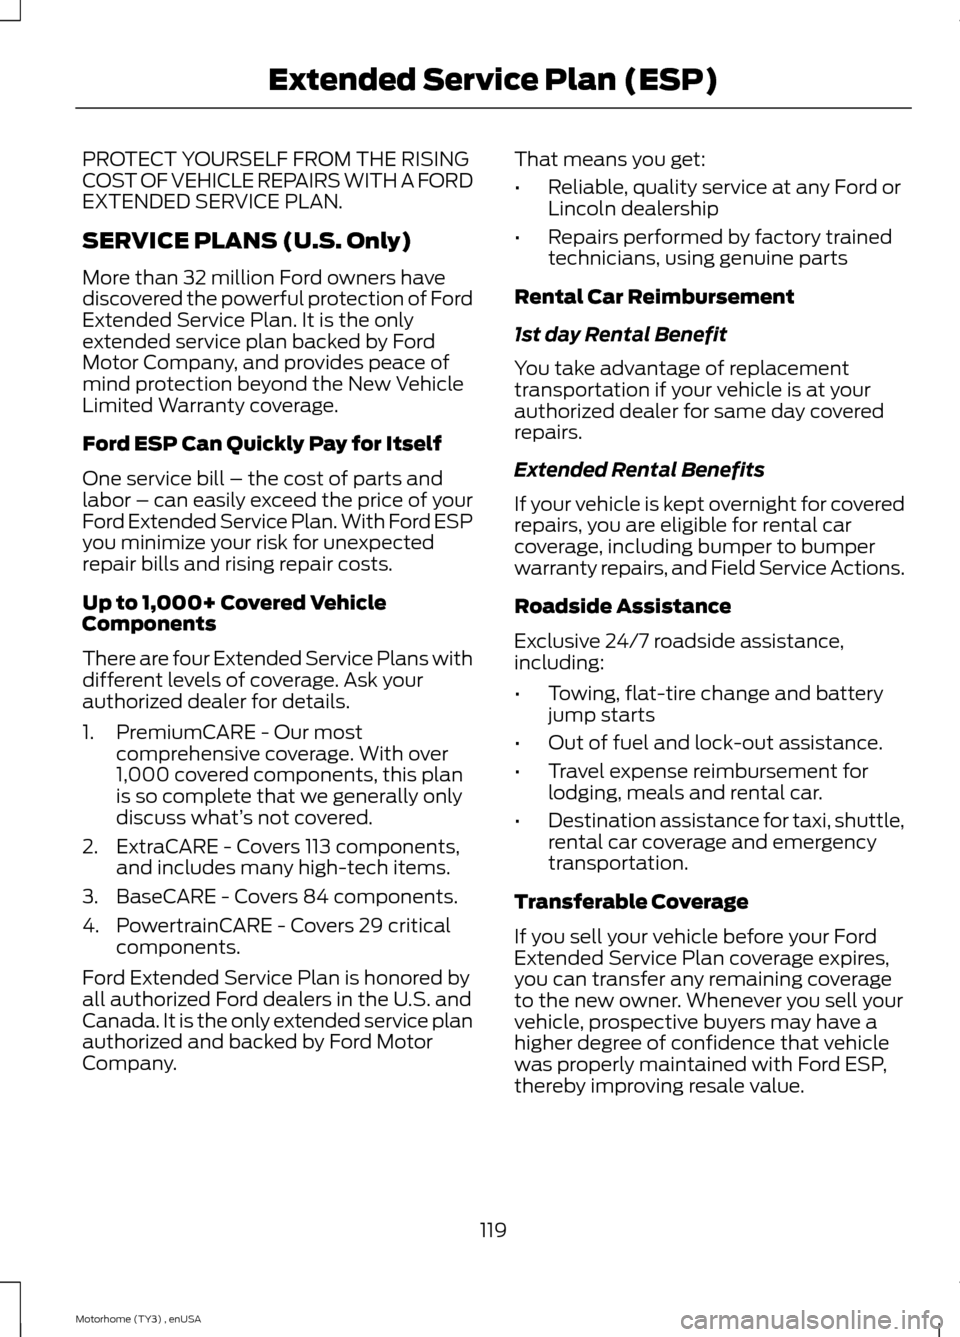 FORD F SERIES MOTORHOME AND COMMERCIAL CHASSIS 2014 12.G Owners Manual PROTECT YOURSELF FROM THE RISINGCOST OF VEHICLE REPAIRS WITH A FORDEXTENDED SERVICE PLAN.
SERVICE PLANS (U.S. Only)
More than 32 million Ford owners havediscovered the powerful protection of FordExten